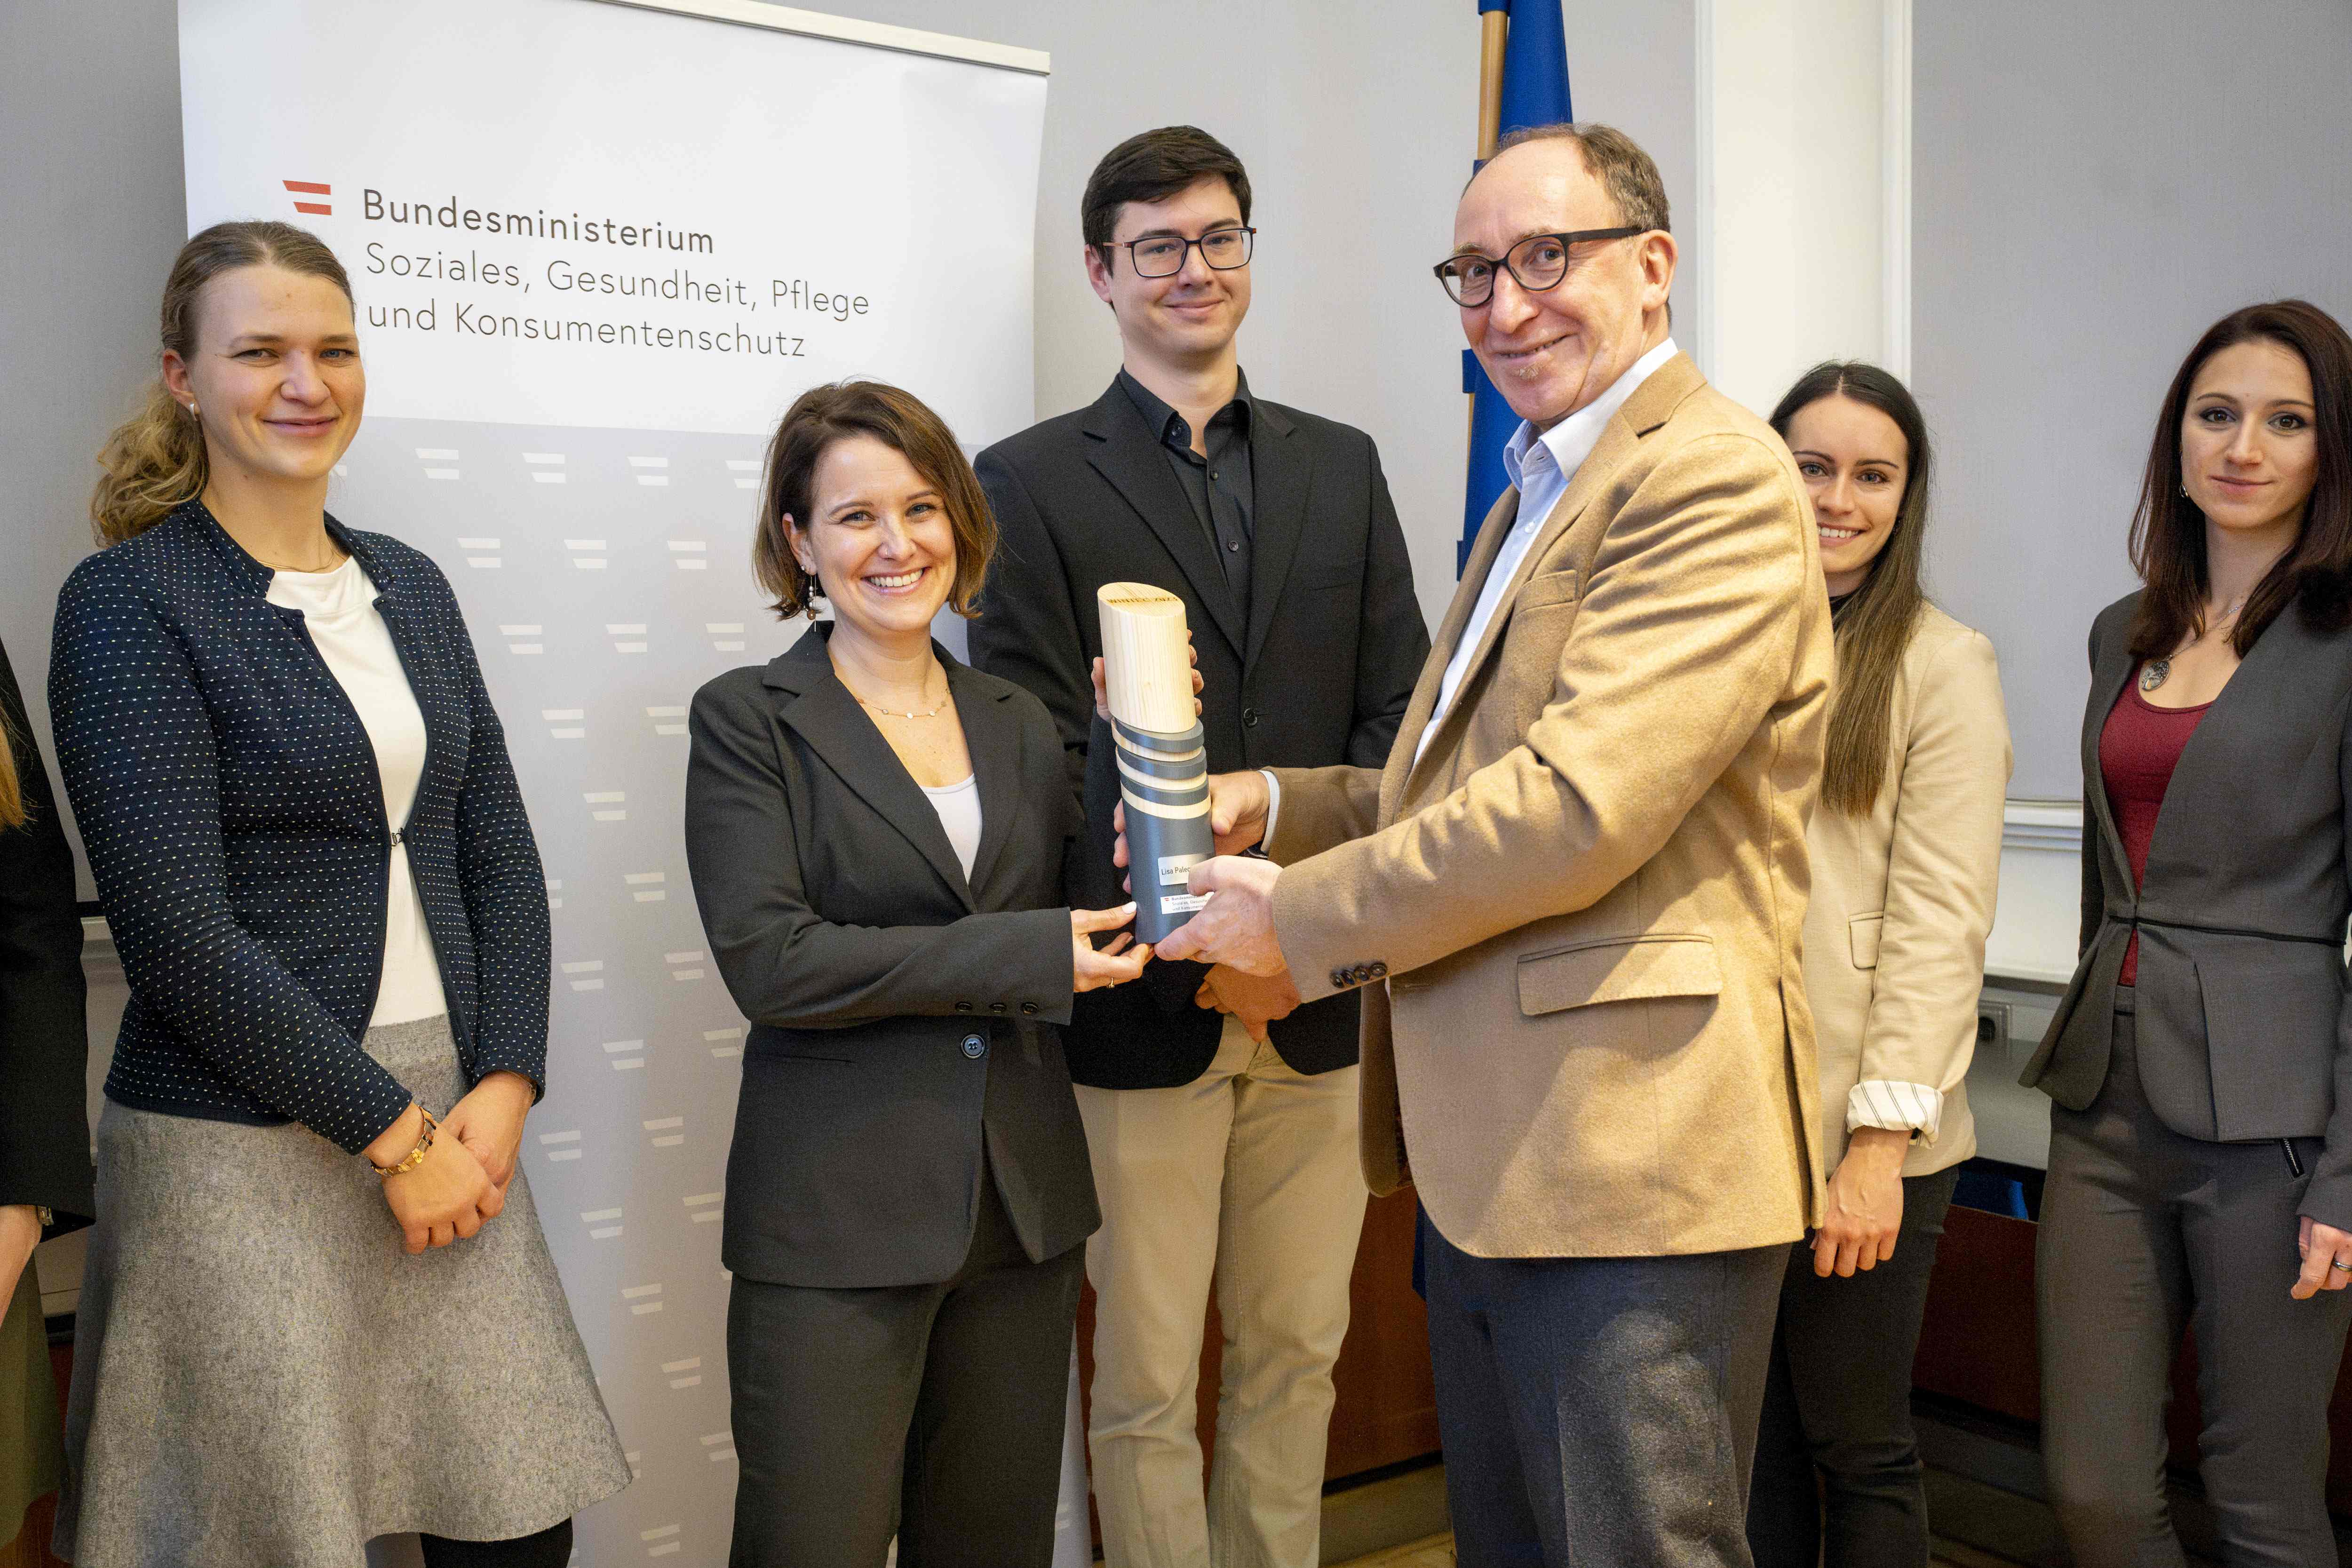 Minister Johannes Rauch presents Lisa Paleczek with the Wintec Integration Award for her "RegioDiff" project ©BMSGPK/Karo Pernegger